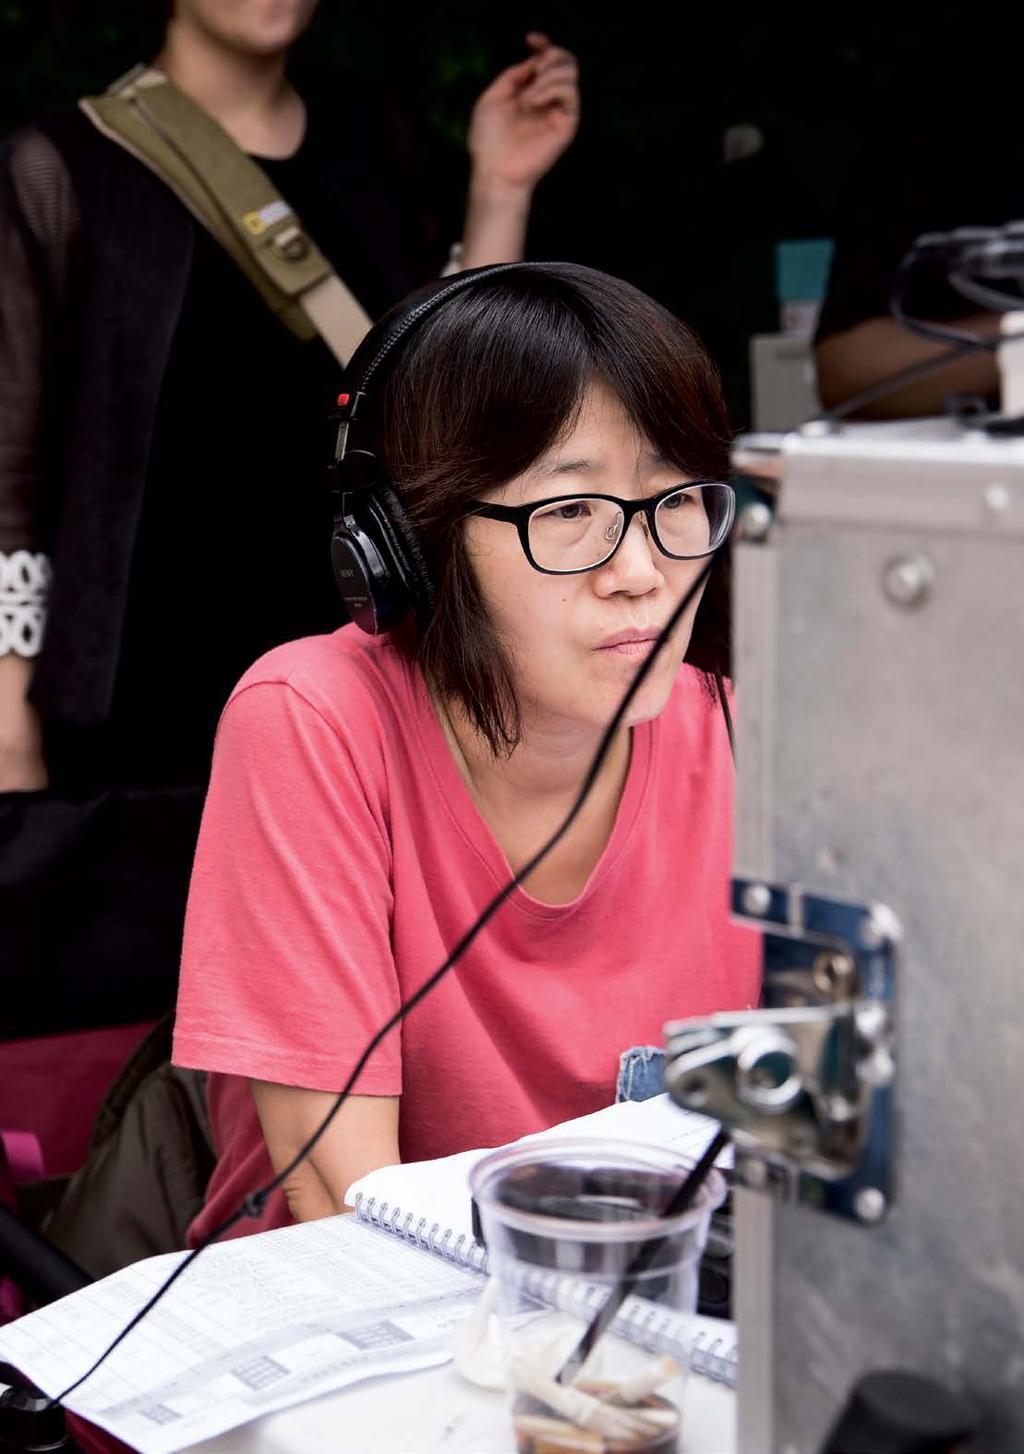 DIRECTOR SHIN Su-won Biography Born in 1967, director SHIN studied screenplay at Korea National University of Arts, and made her feature debut in 2010 with PASSERBY #3, which won the Best